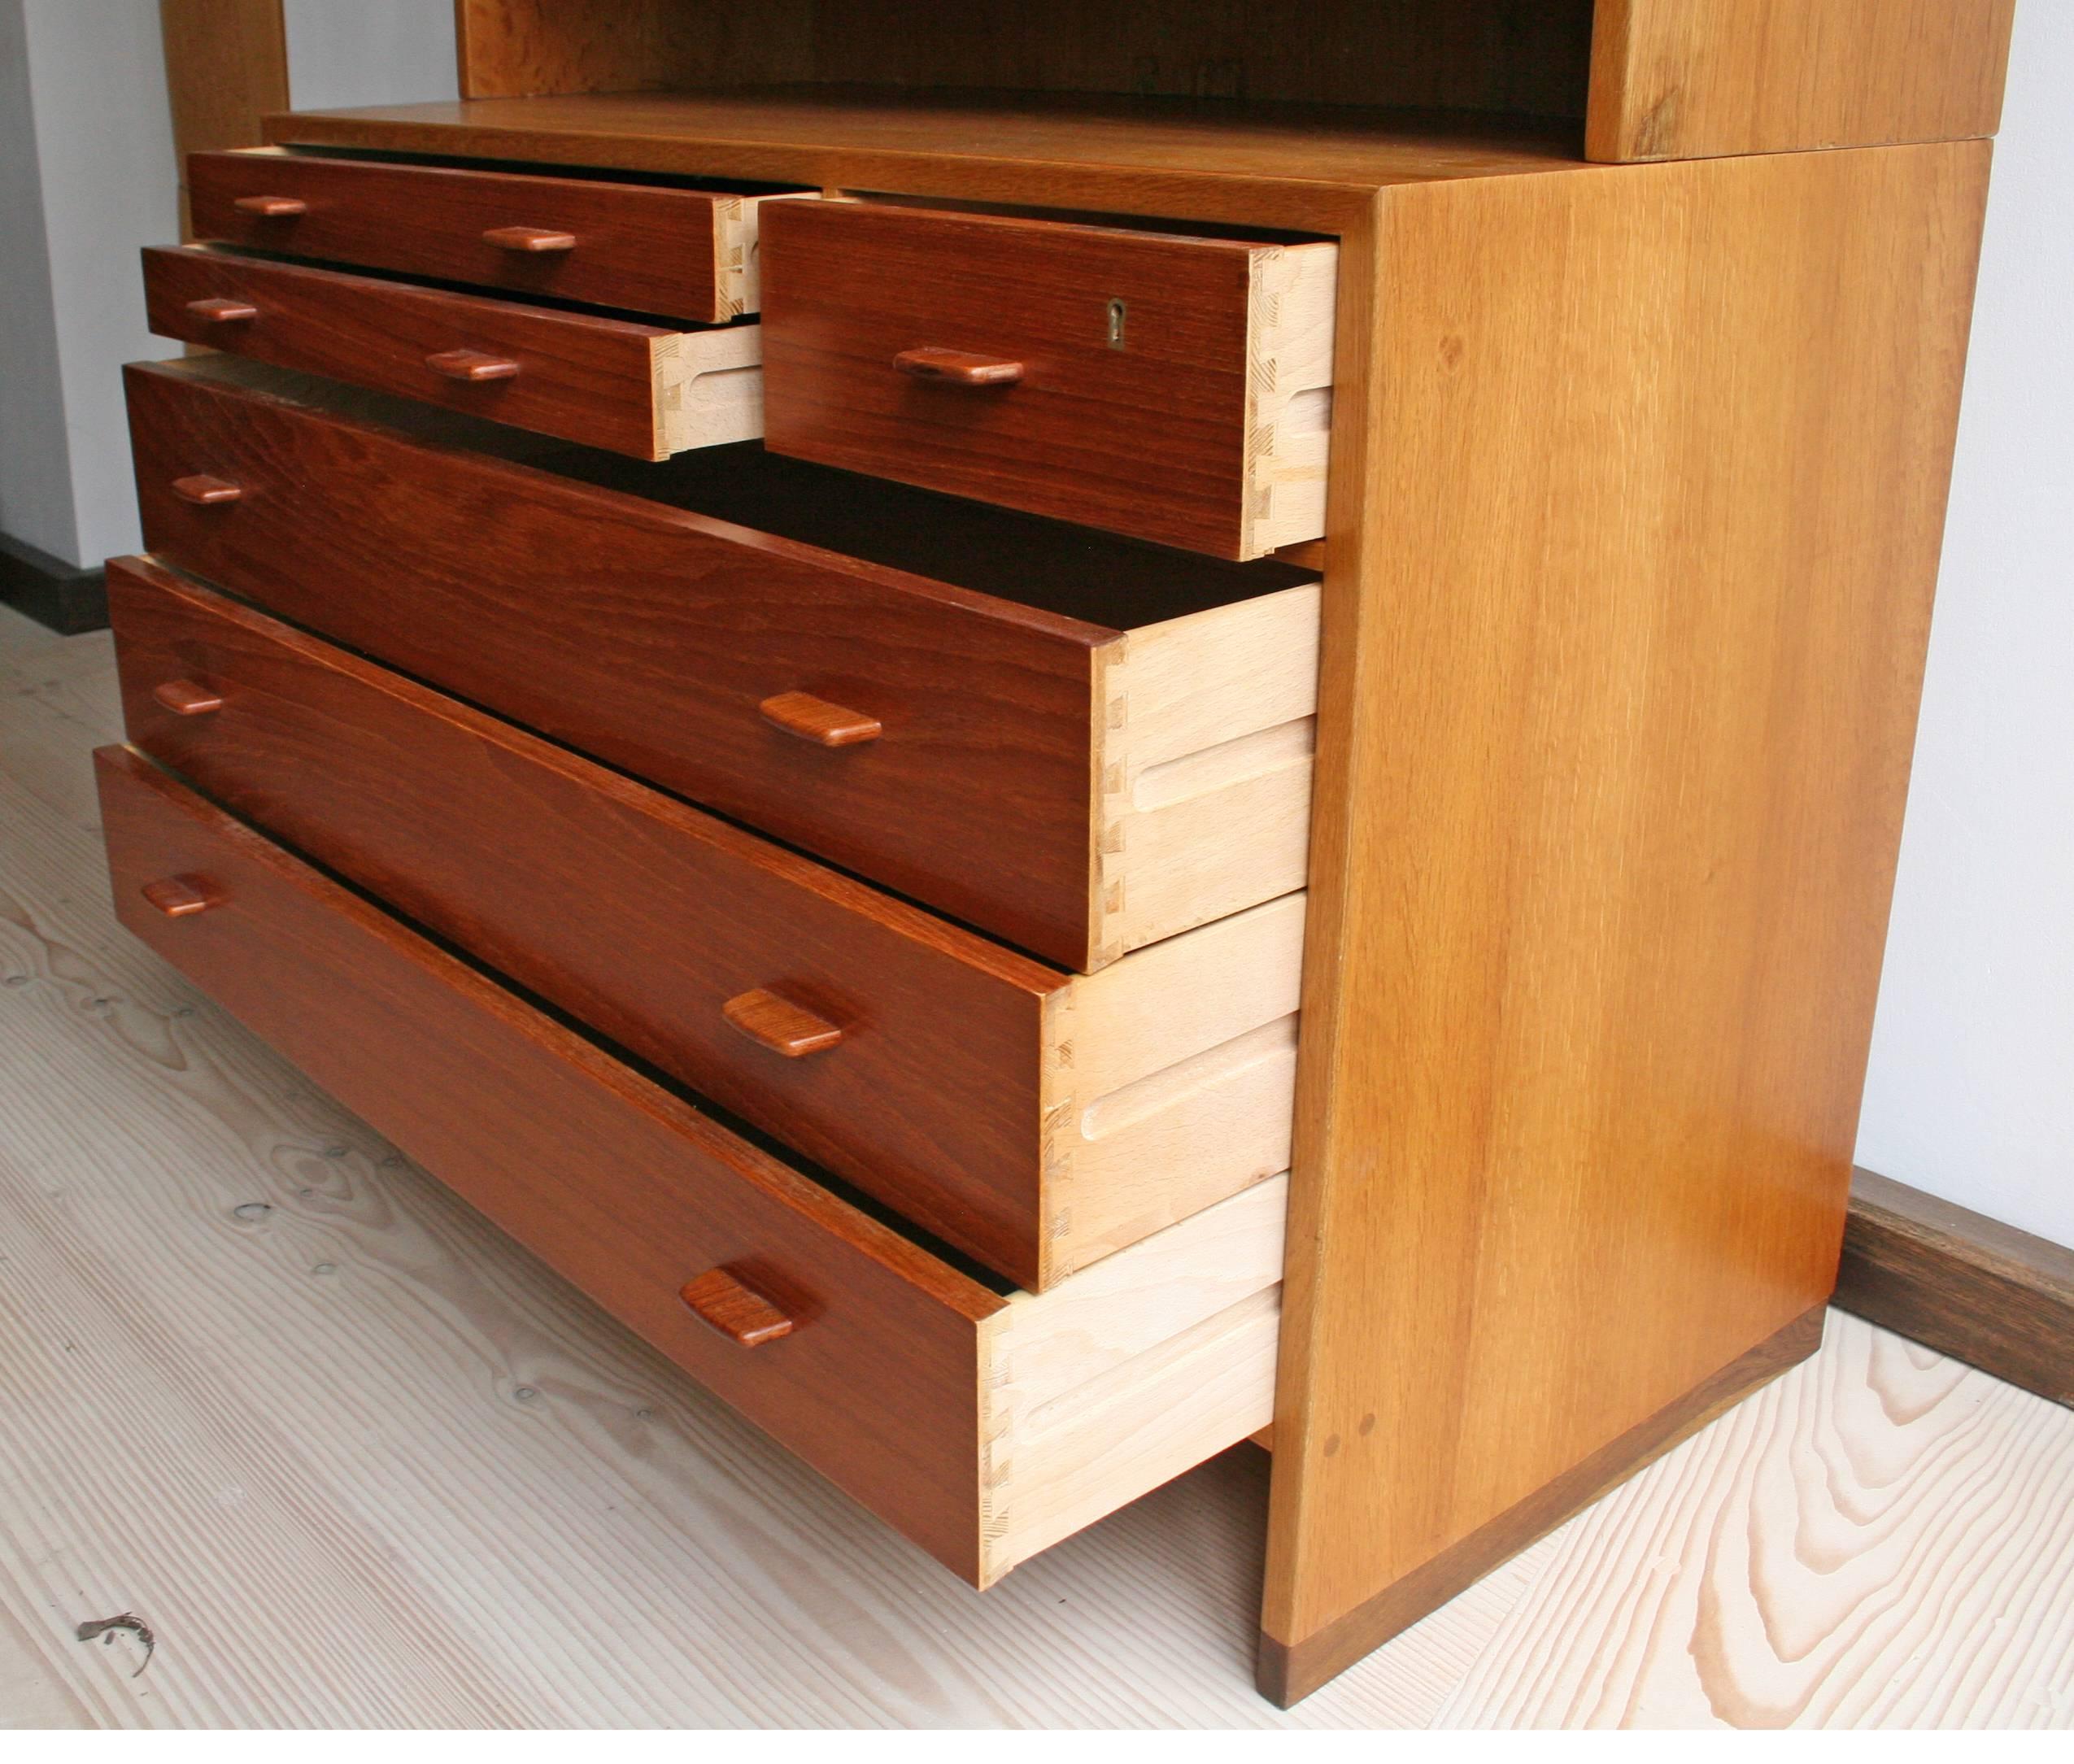 chest of drawers with shelves above